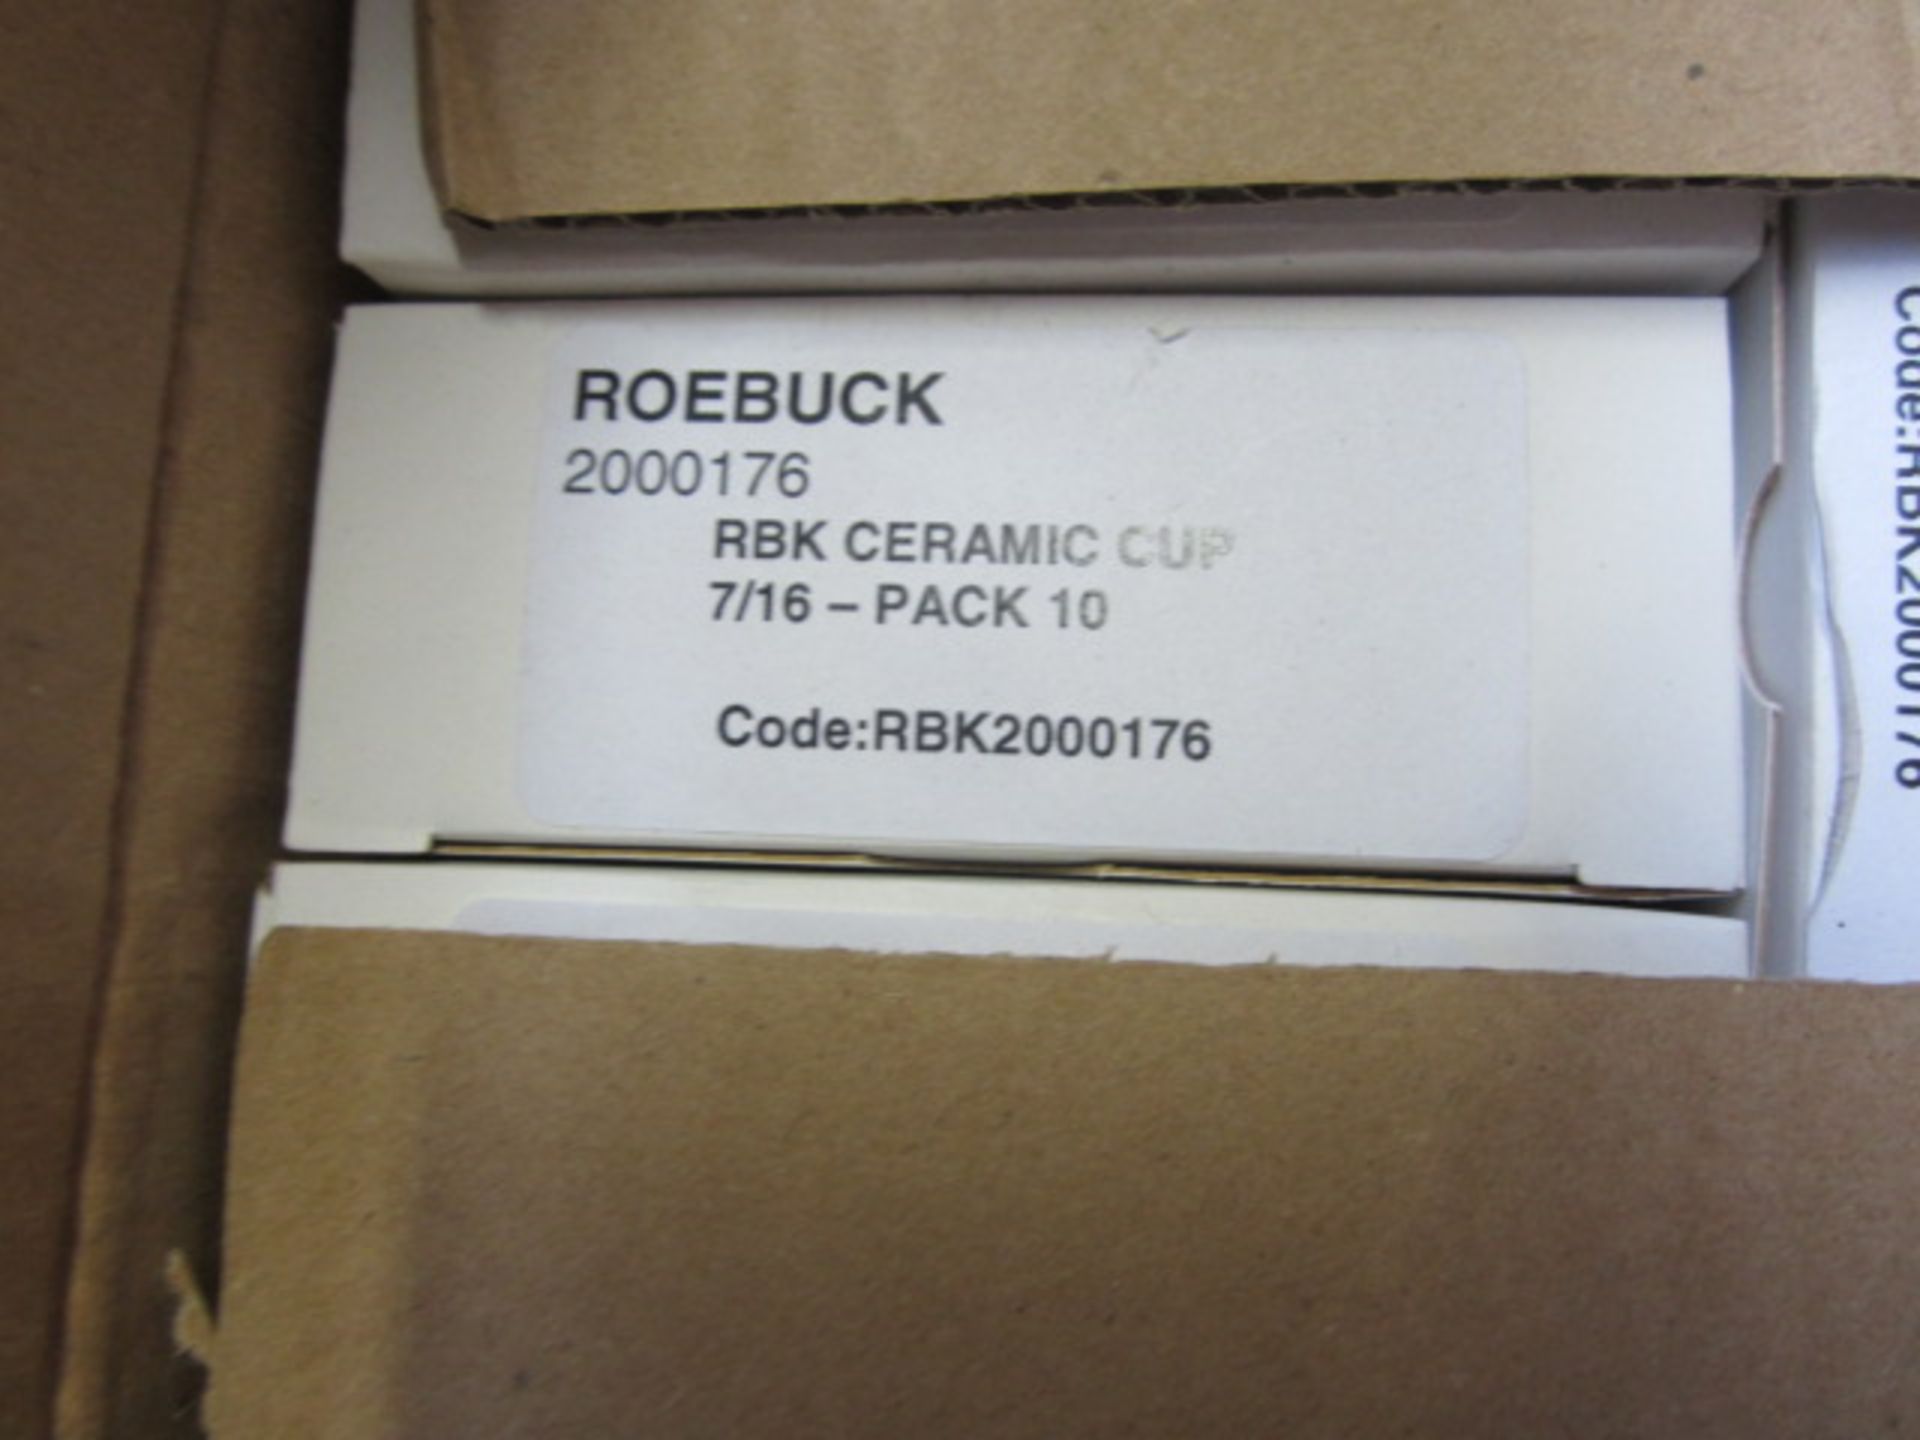 Approx. 1000 Roebuck 7/16" ceramic cups - Image 3 of 4